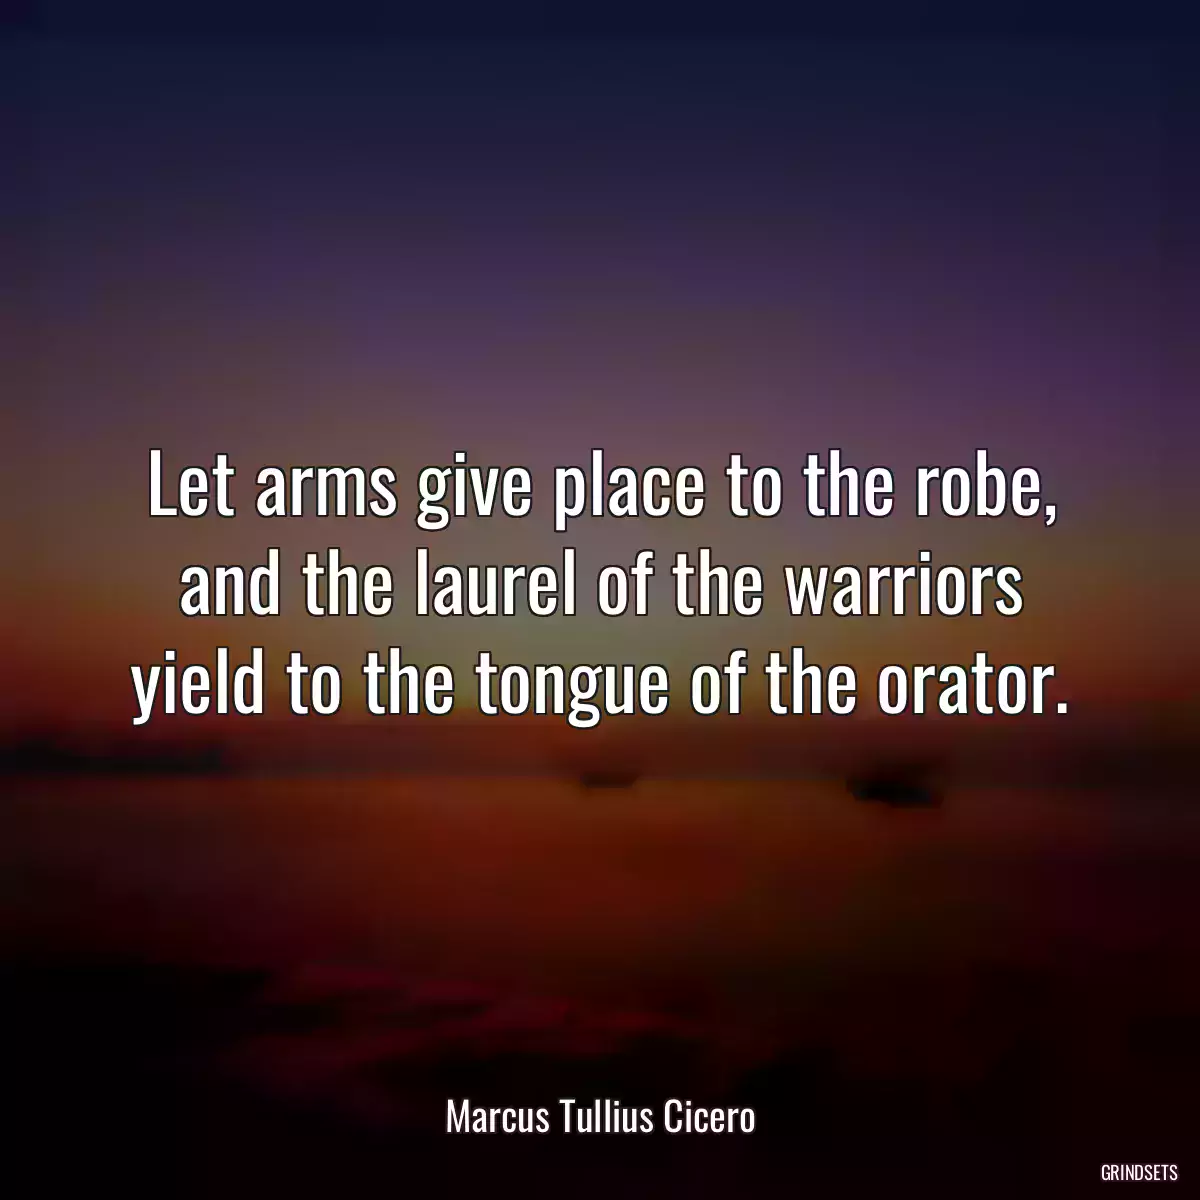 Let arms give place to the robe, and the laurel of the warriors yield to the tongue of the orator.